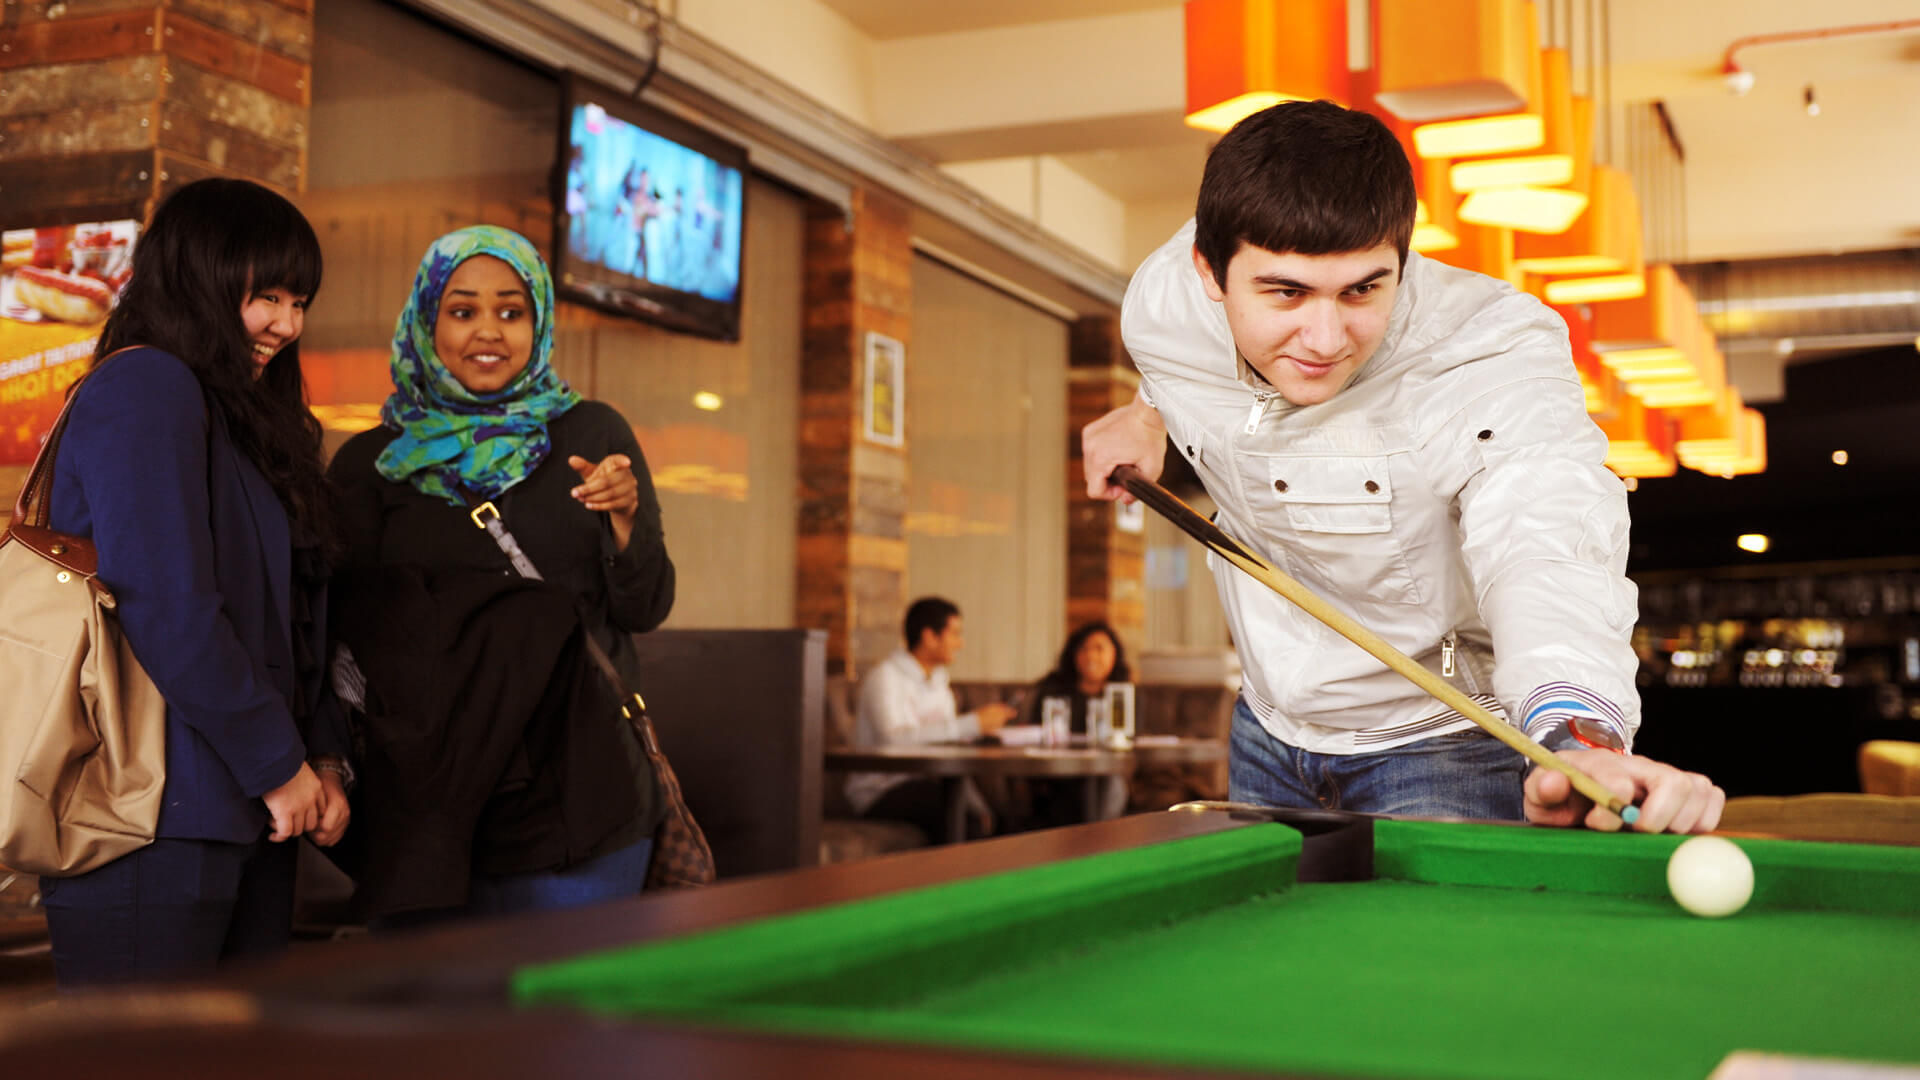 Students playing pool at the students' union at the University of Manchester